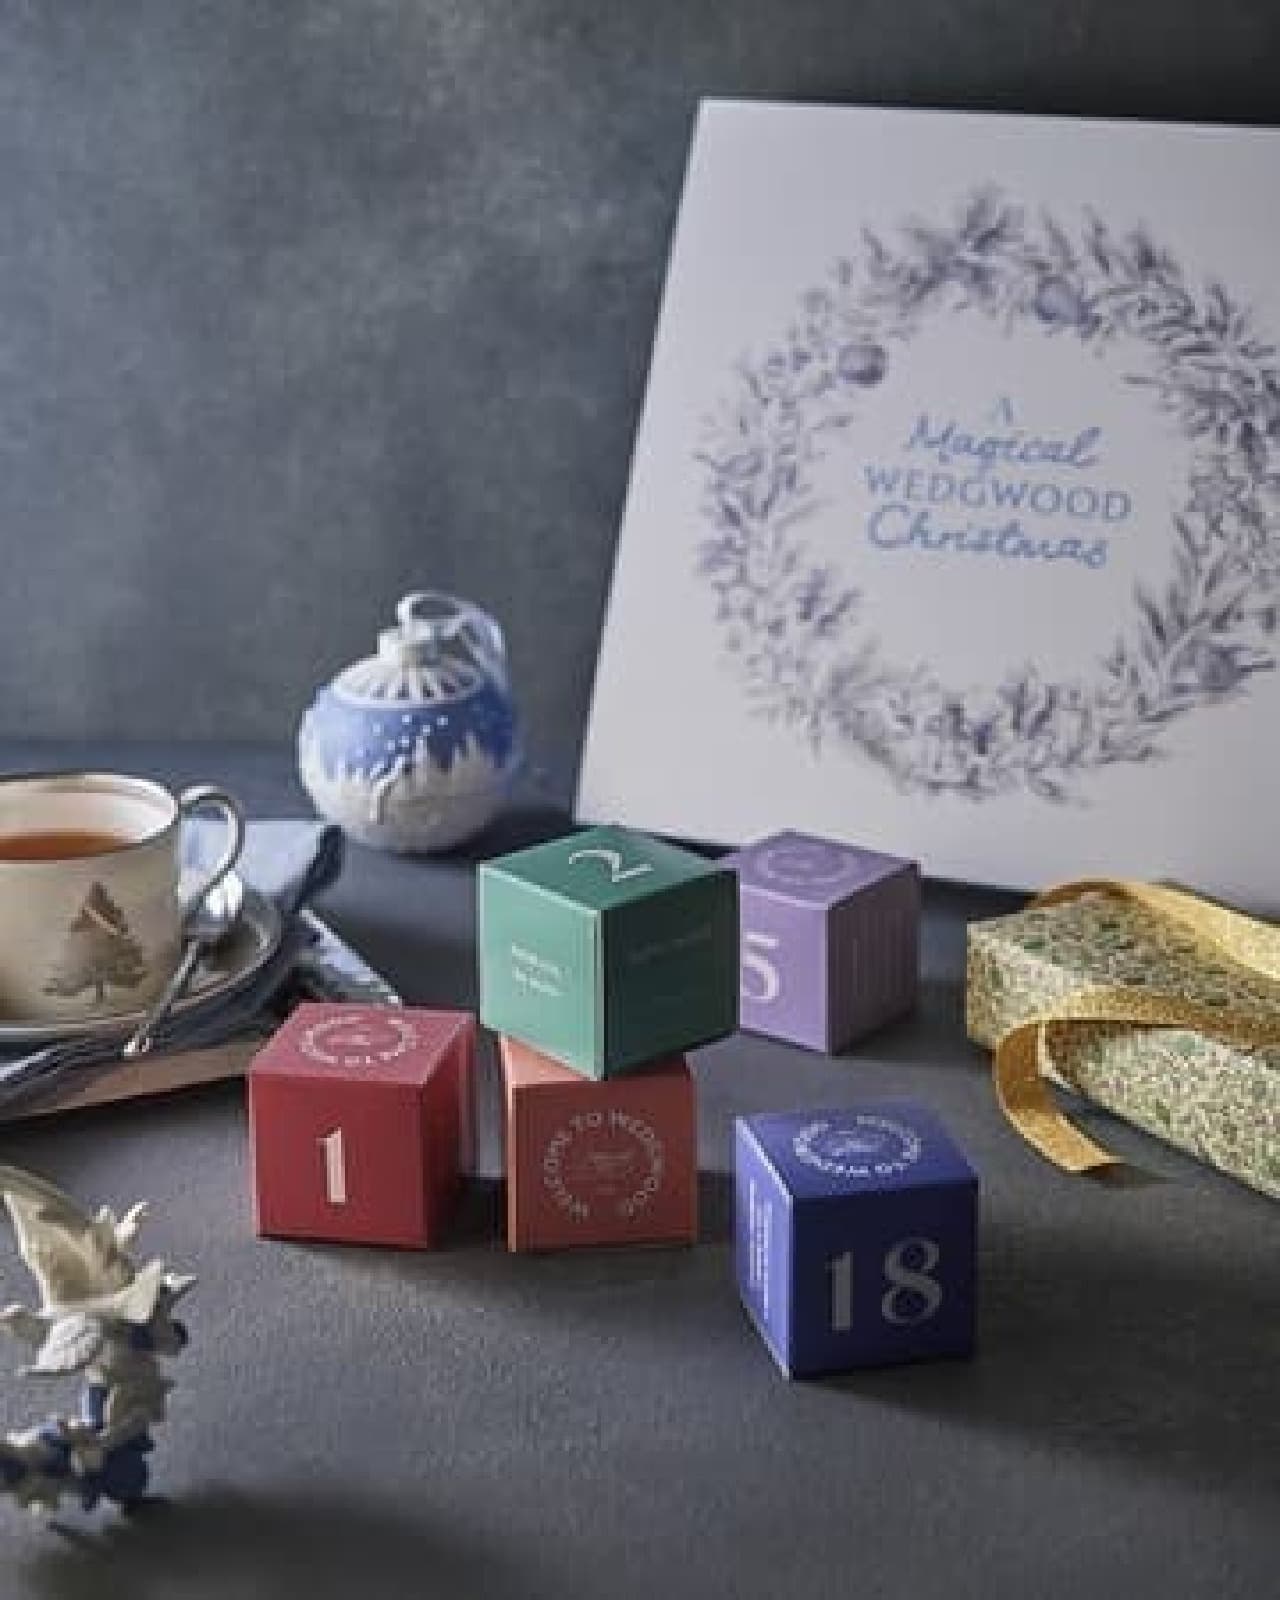 Wedgwood "Advent Tea Calendar" is available in limited quantities--25 types of tea to enjoy while waiting for Christmas